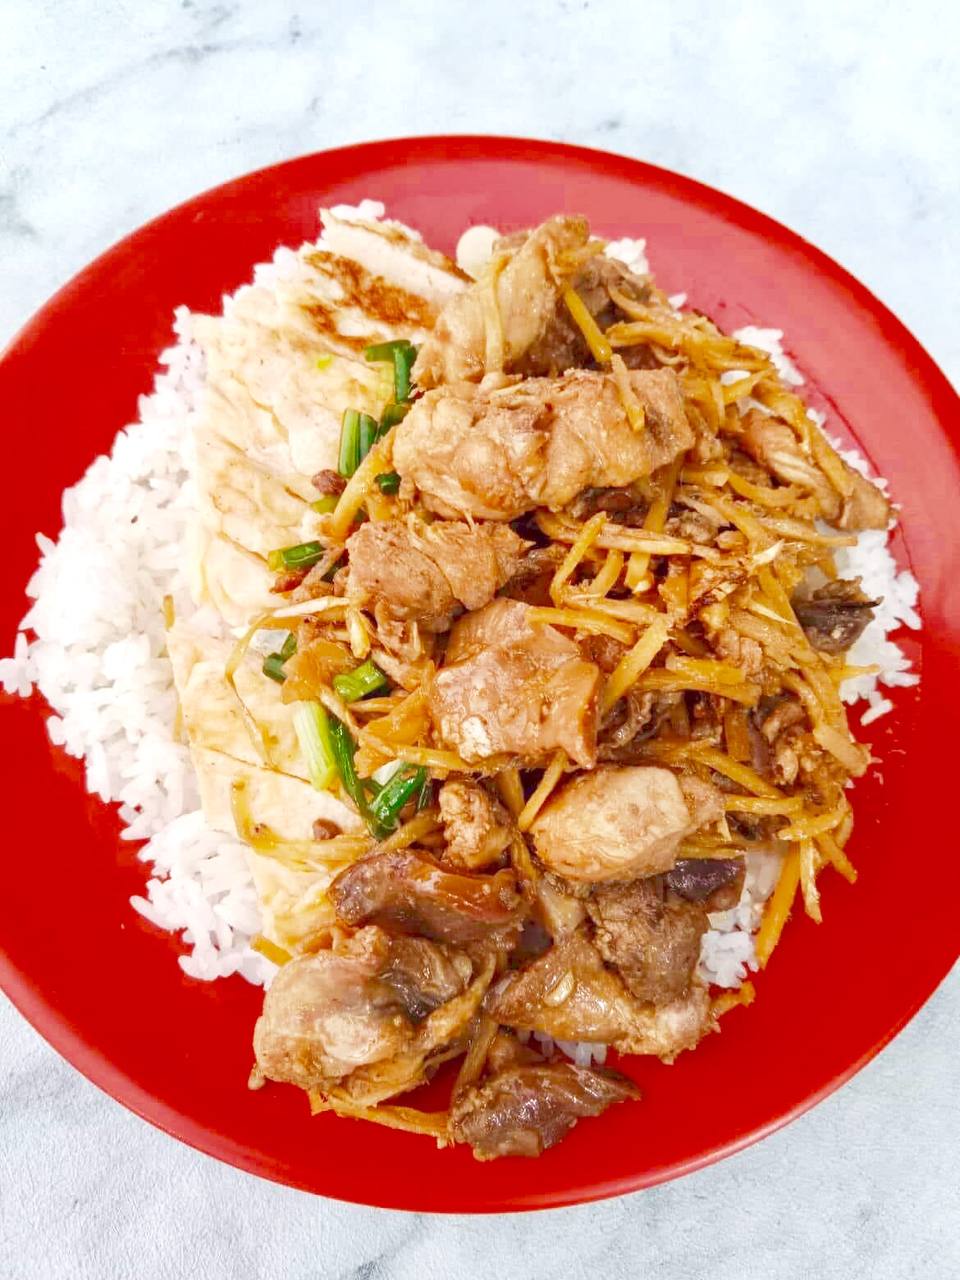 02.Fry Rice in Chicken